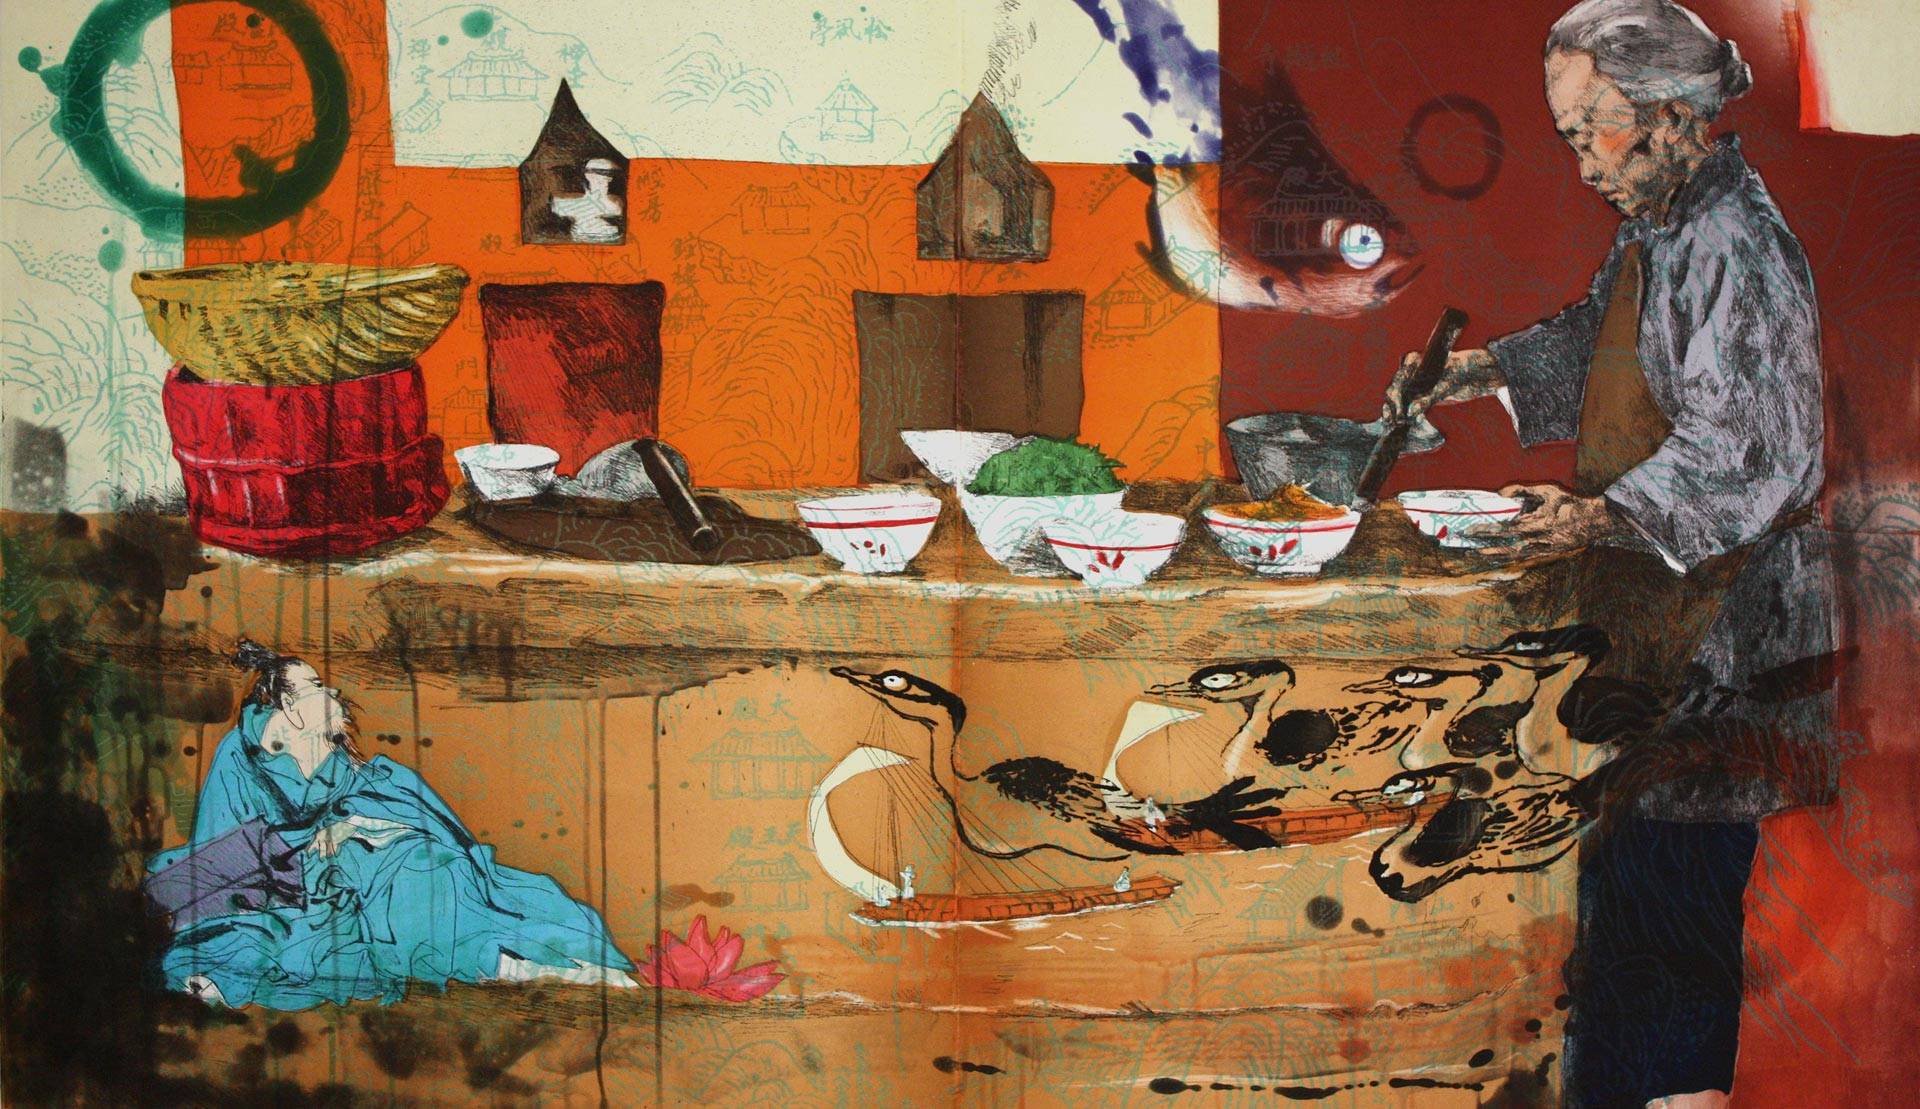 'Luzao (Stove)' (2008), by Hung Liu. It's one of the paintings that speak to the dignity of labor in 'We Who Work' at the Santa Cruz Museum of Art and History.  Photo: Courtesy of Hung Liu